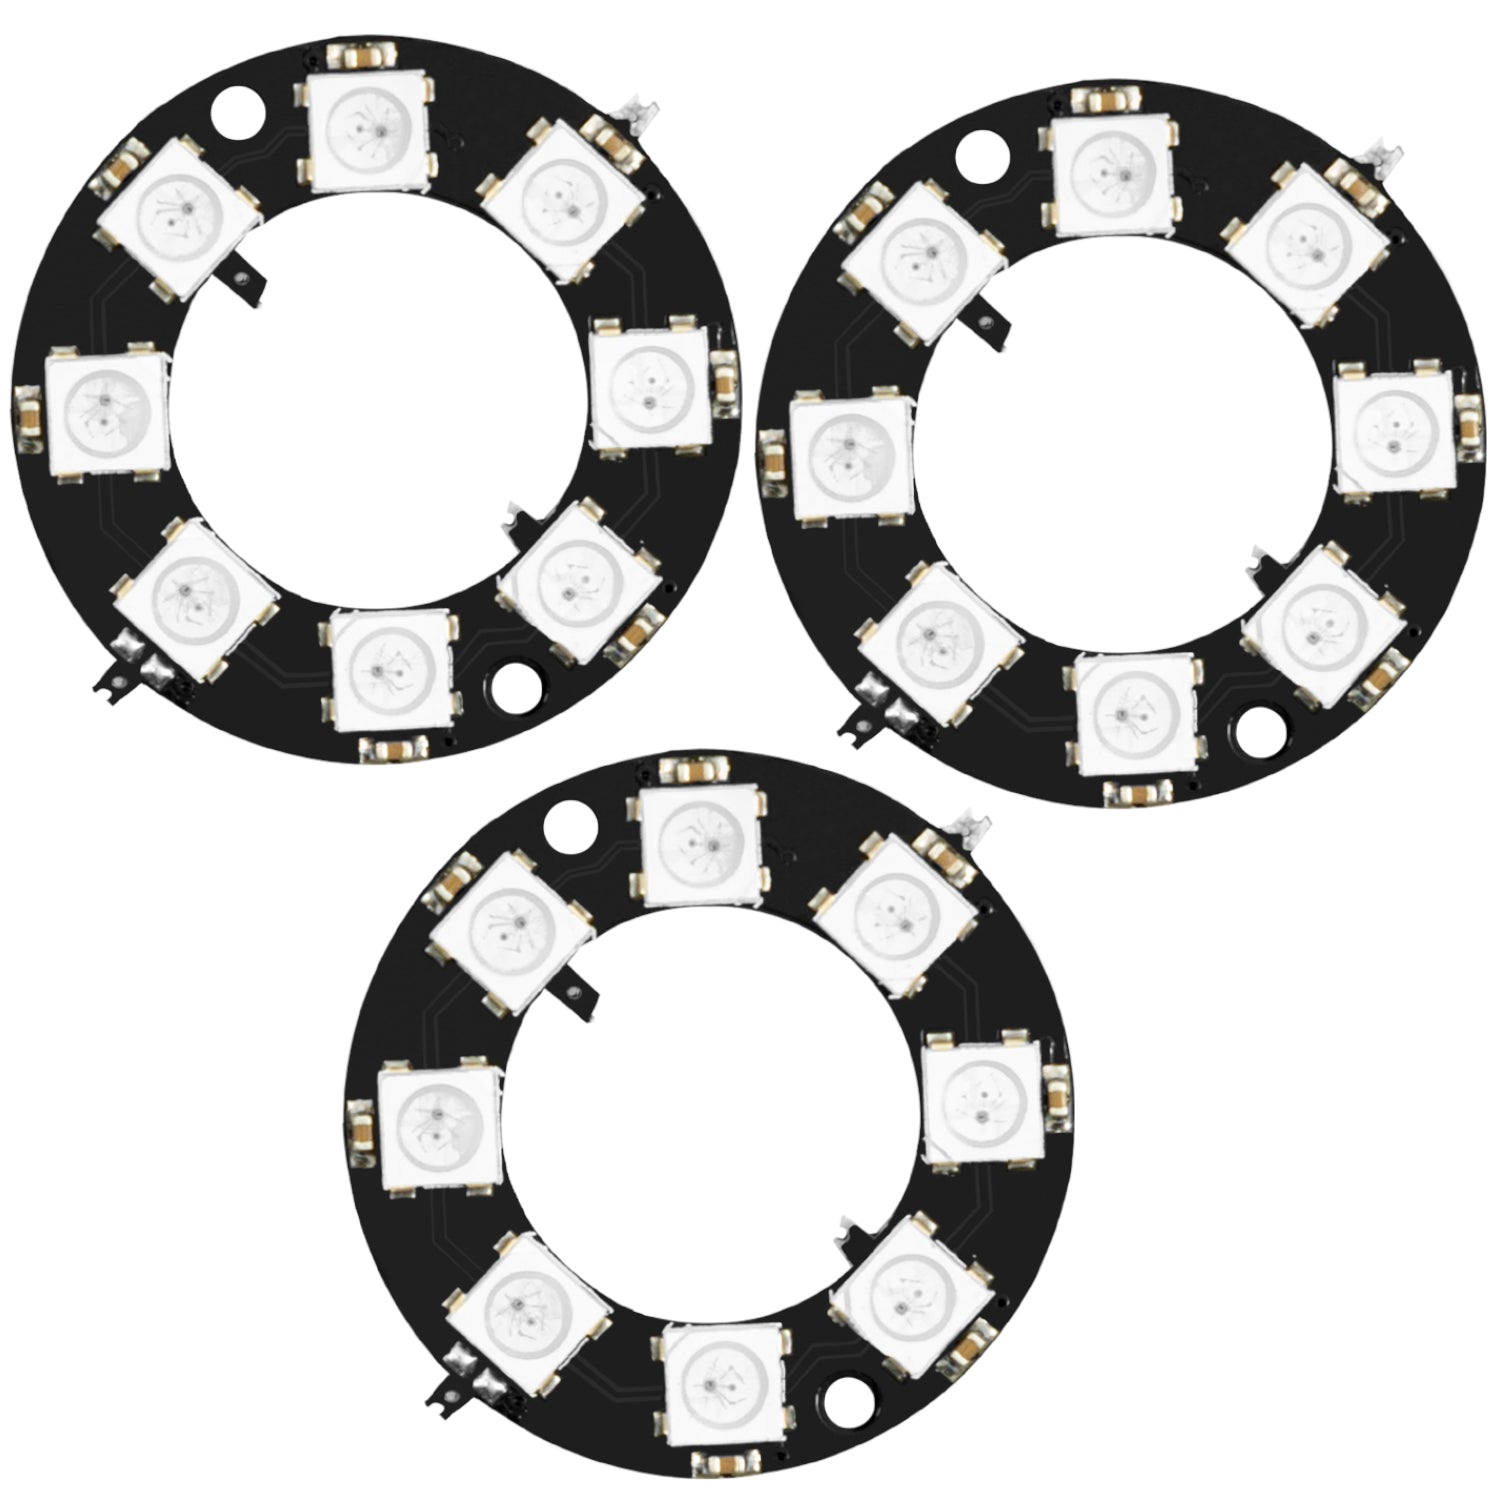 RGB LED ring 8 bit WS2812 5050 + integrated driver